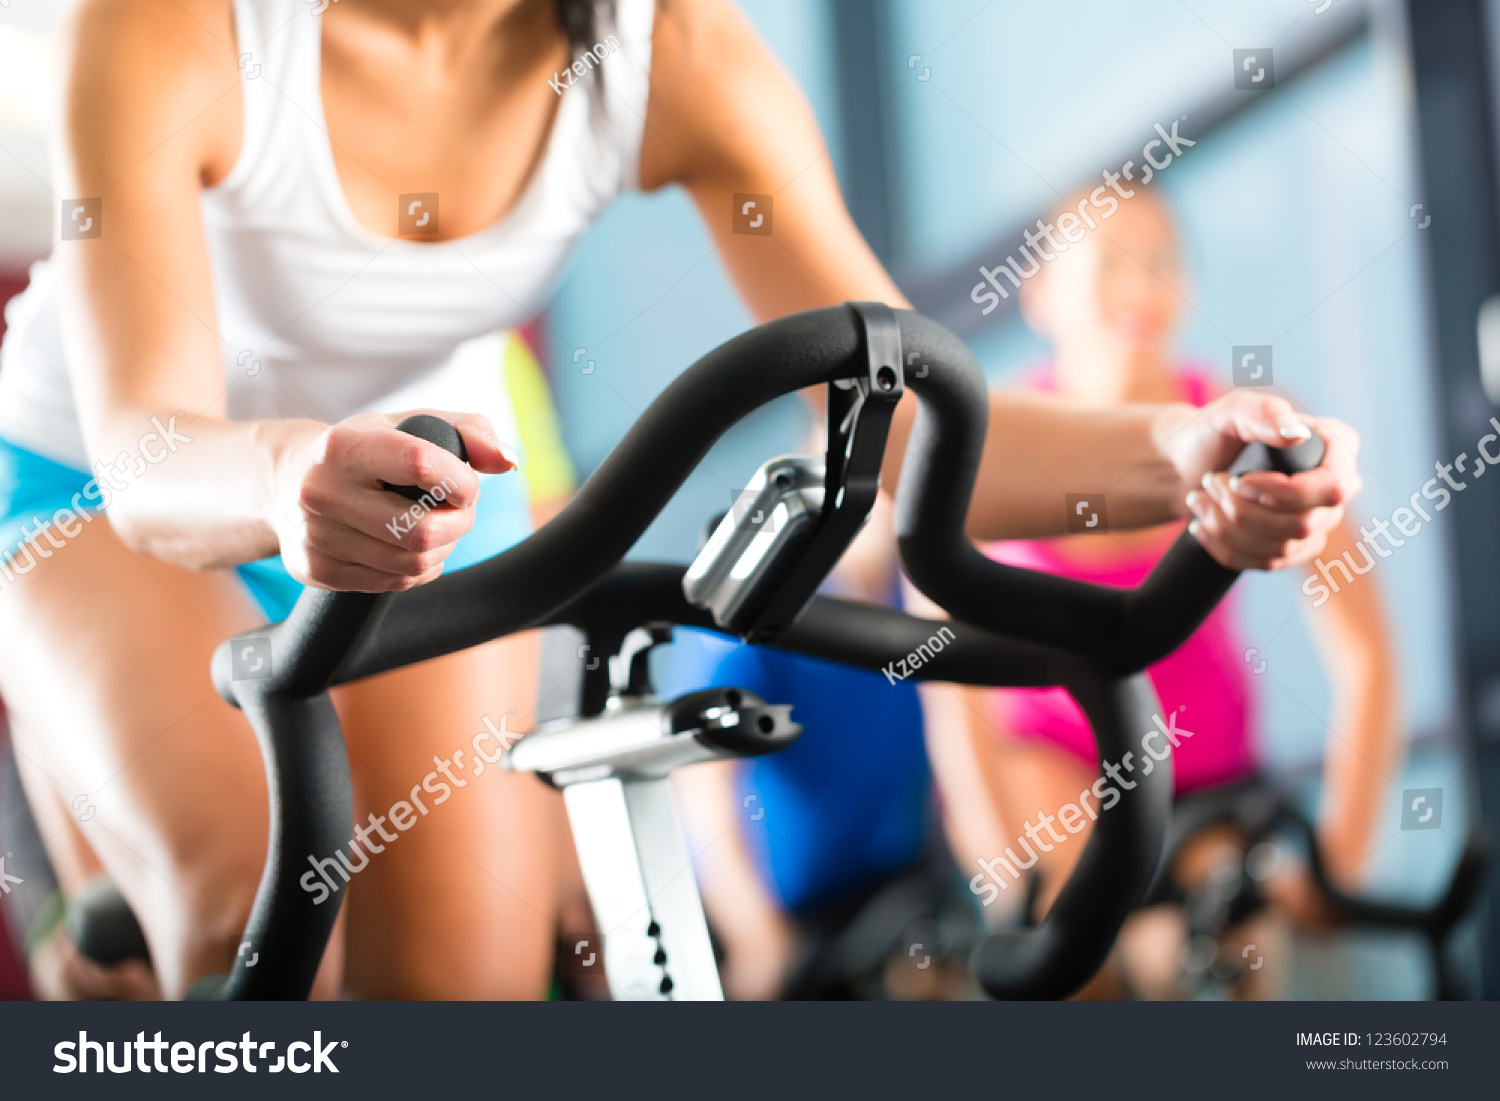 Young People - group of women and men - doing sport biking in the gym for fitness #123602794